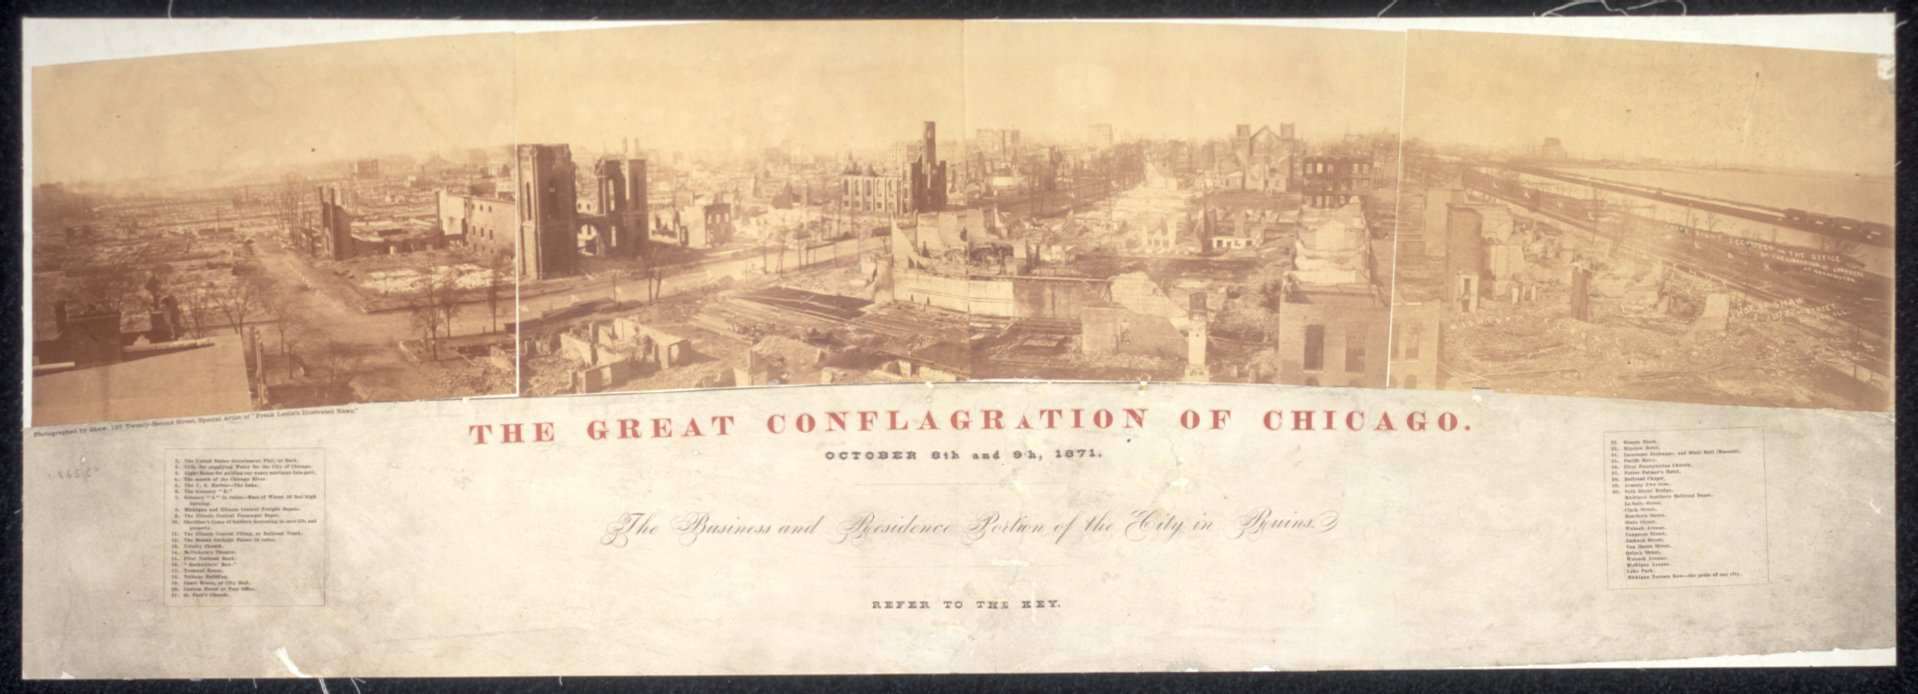 The Great Conflagration of Chicago